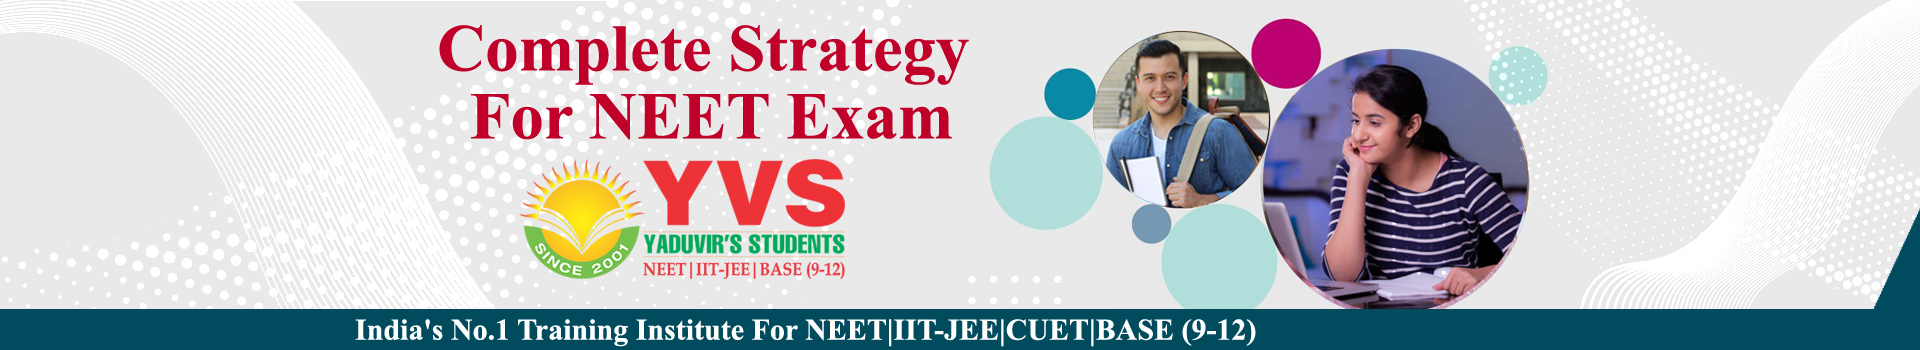 complete-strategy-for-neet-exam